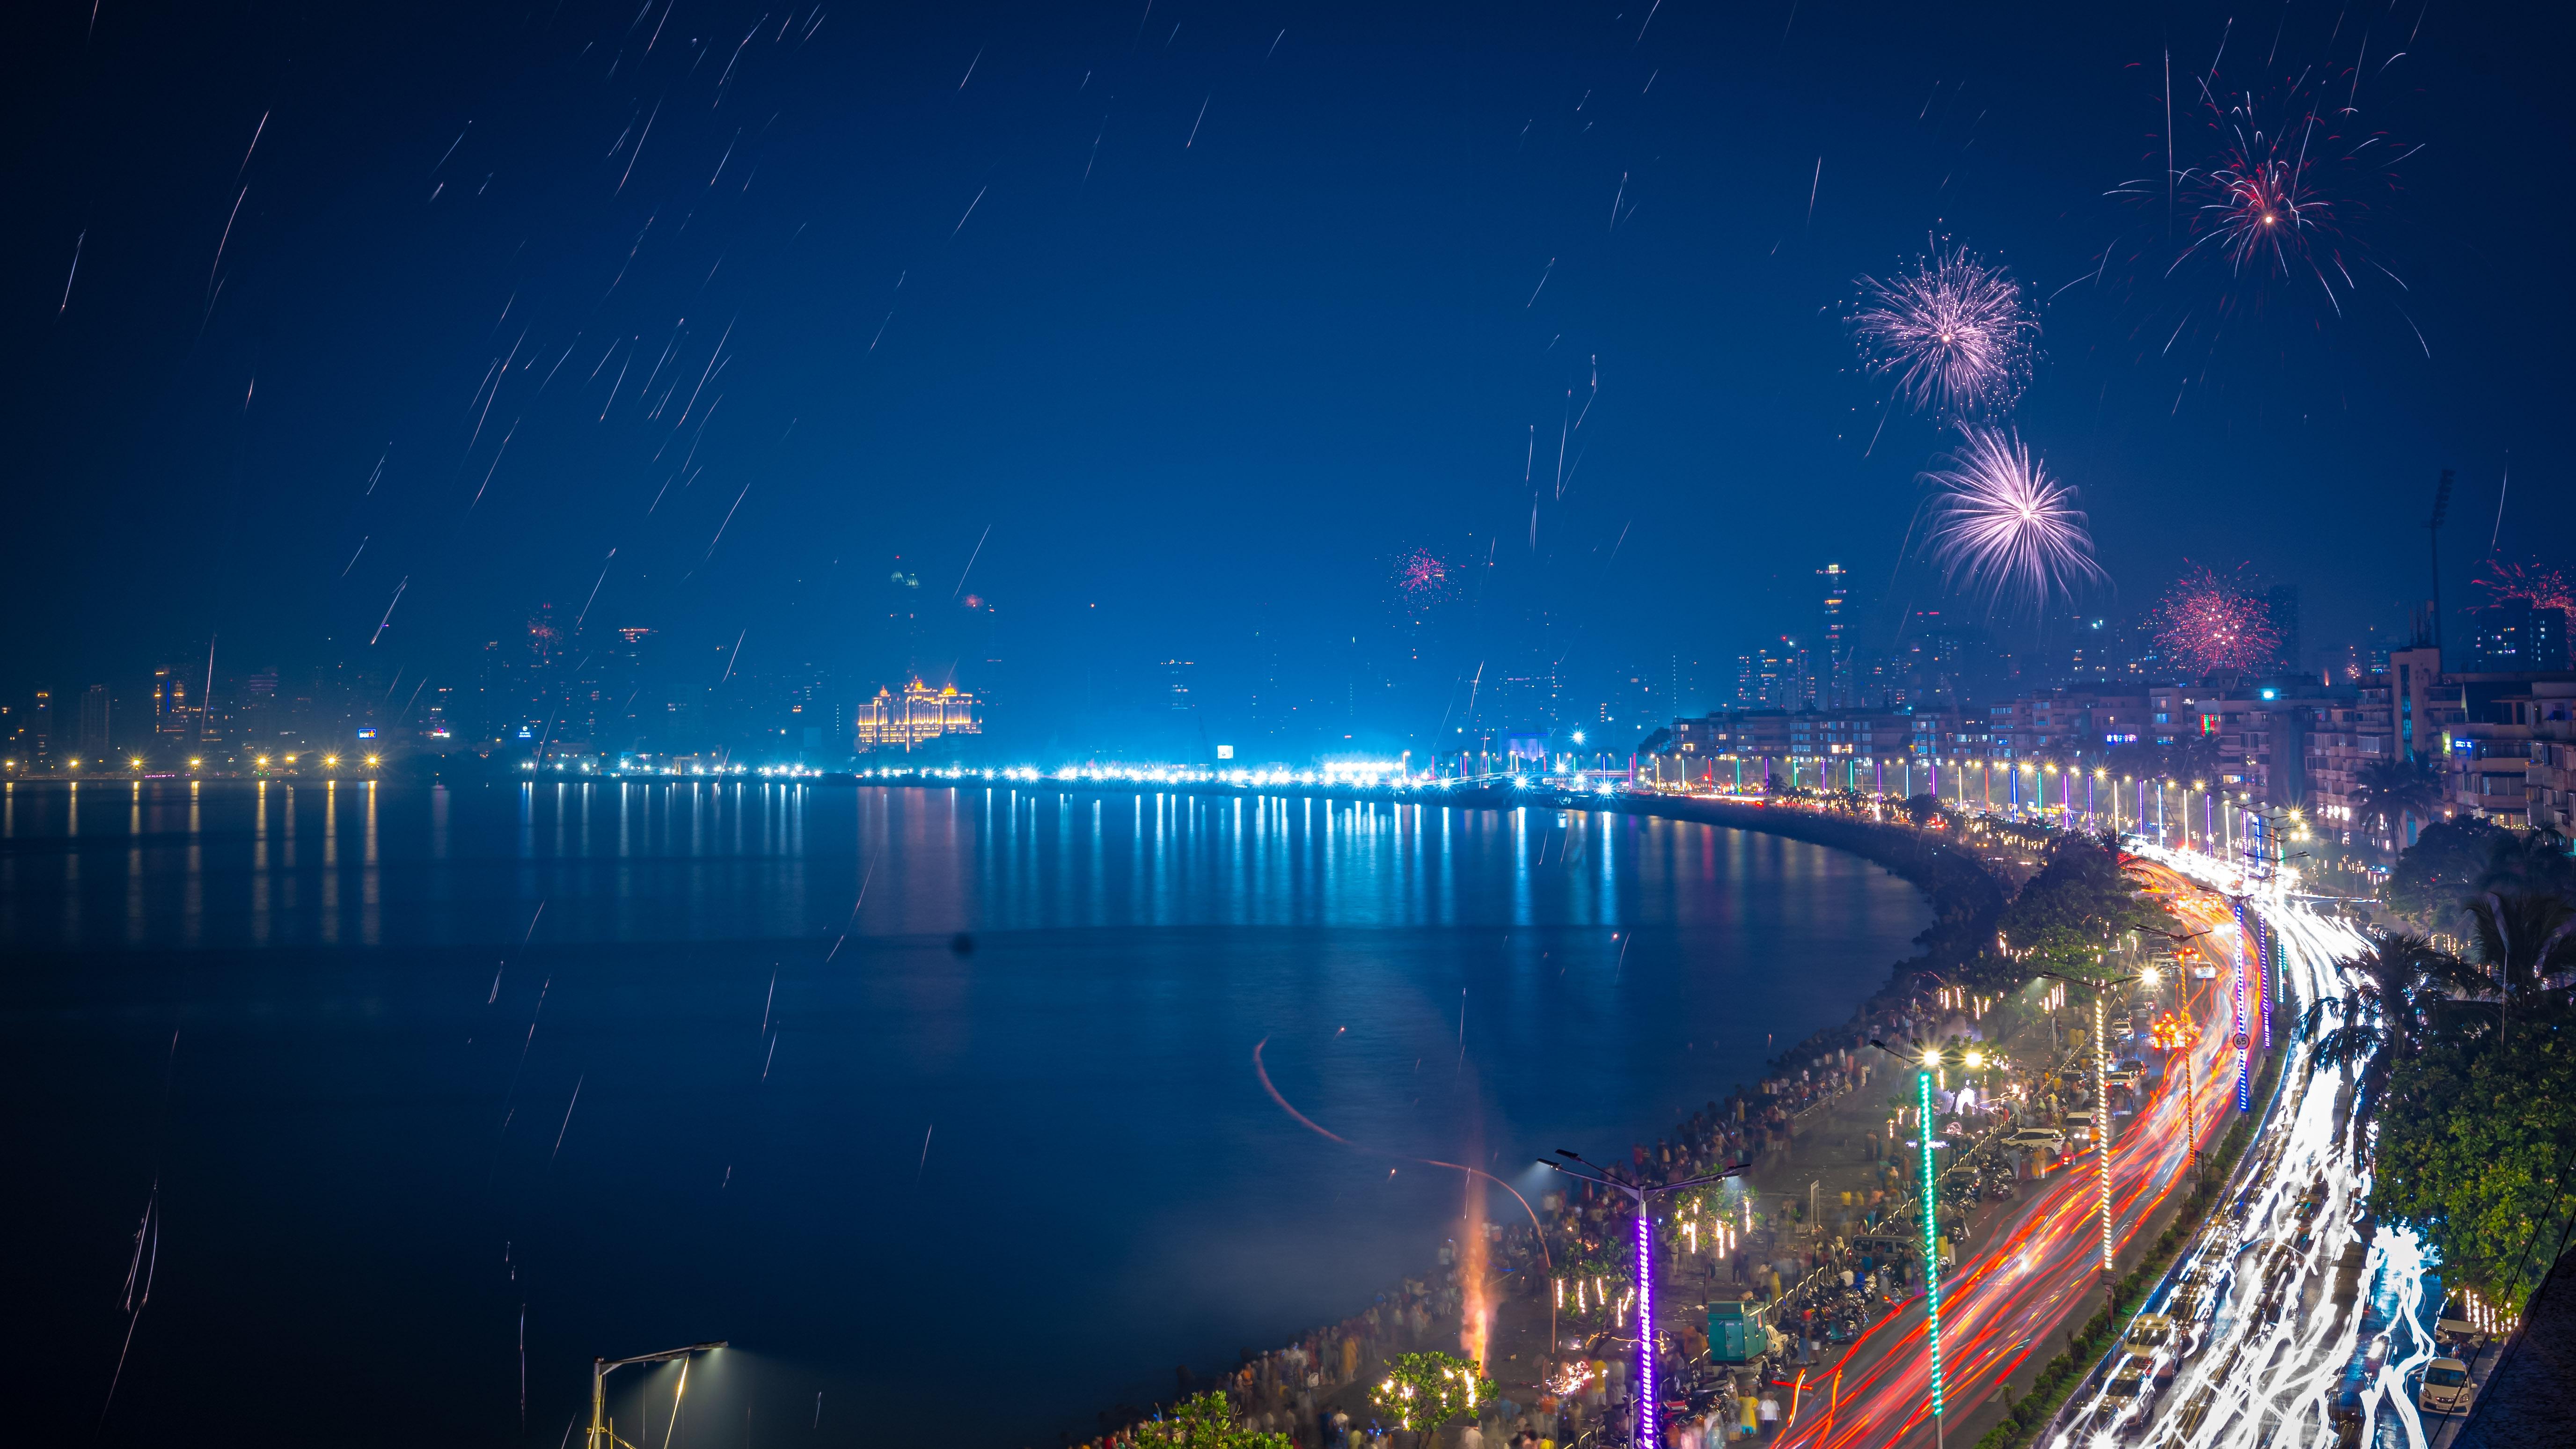 The skyline becomes a canvas of festive brilliance, drawing crowds to witness the breathtaking display.